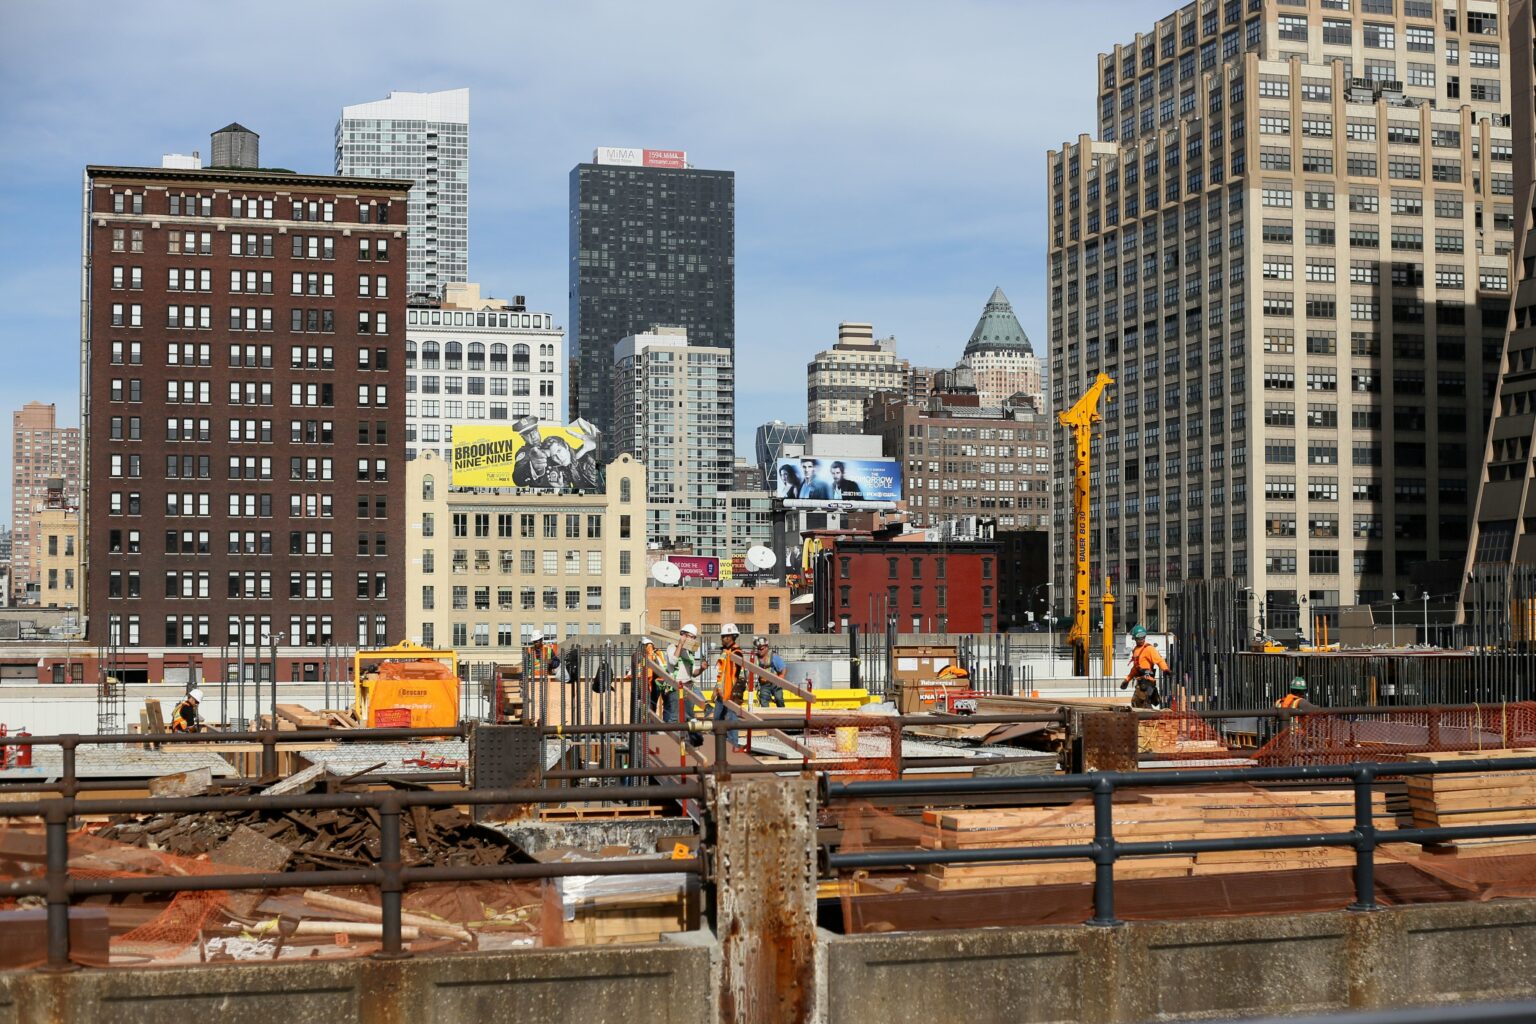 a view of a city construction site with tall buildings in the background
                                           